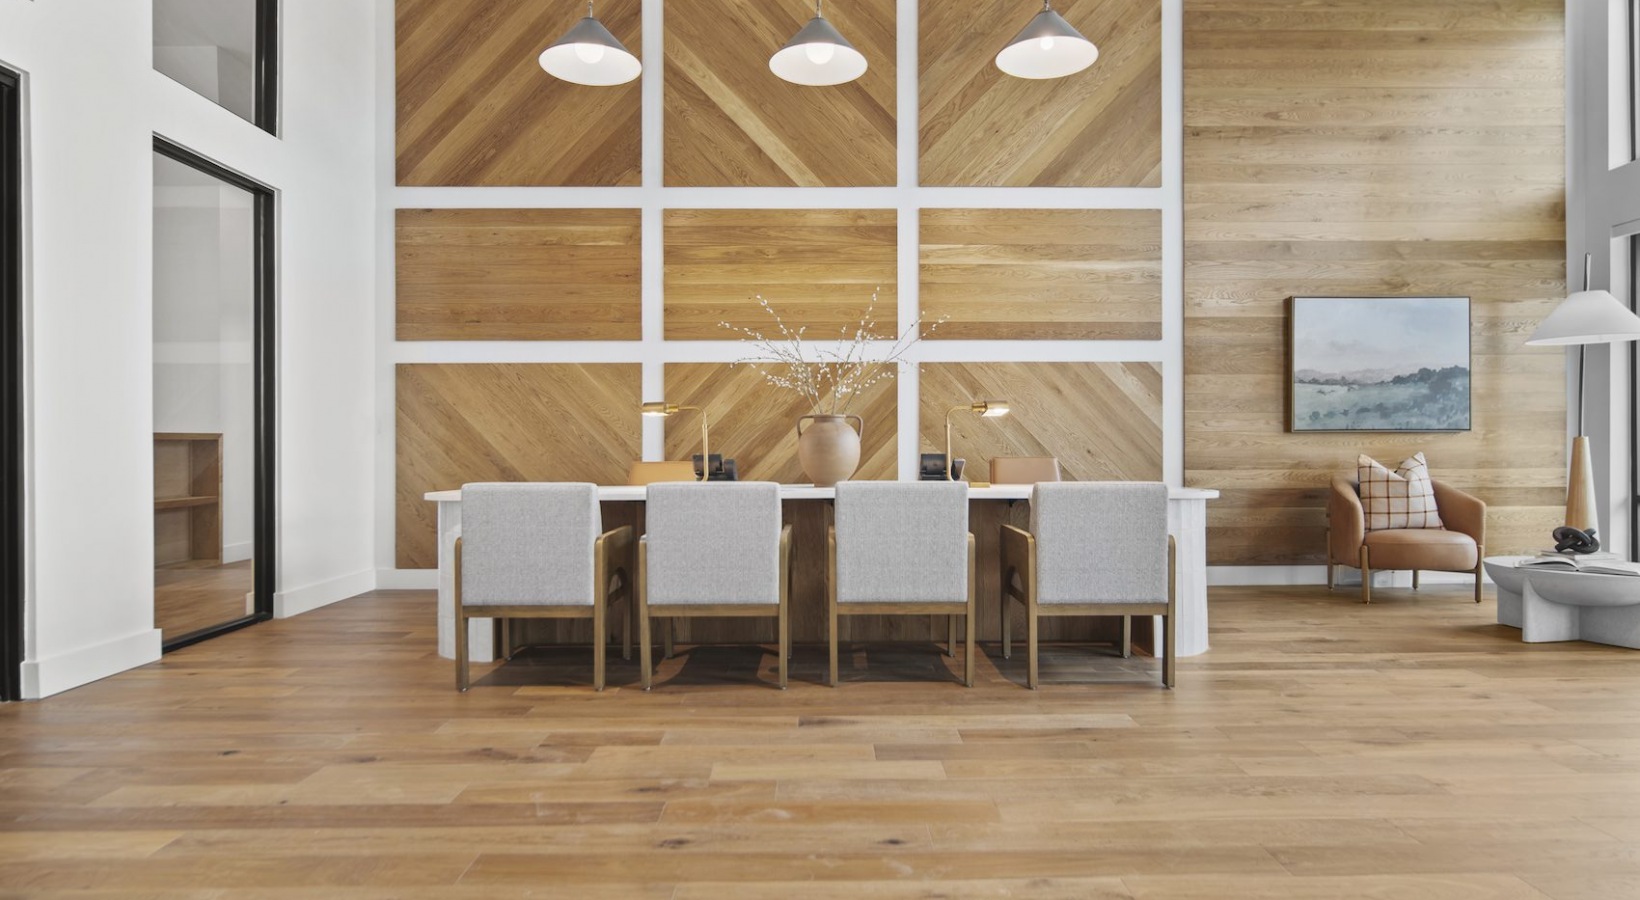 Modern office with wood floors and wood paneling